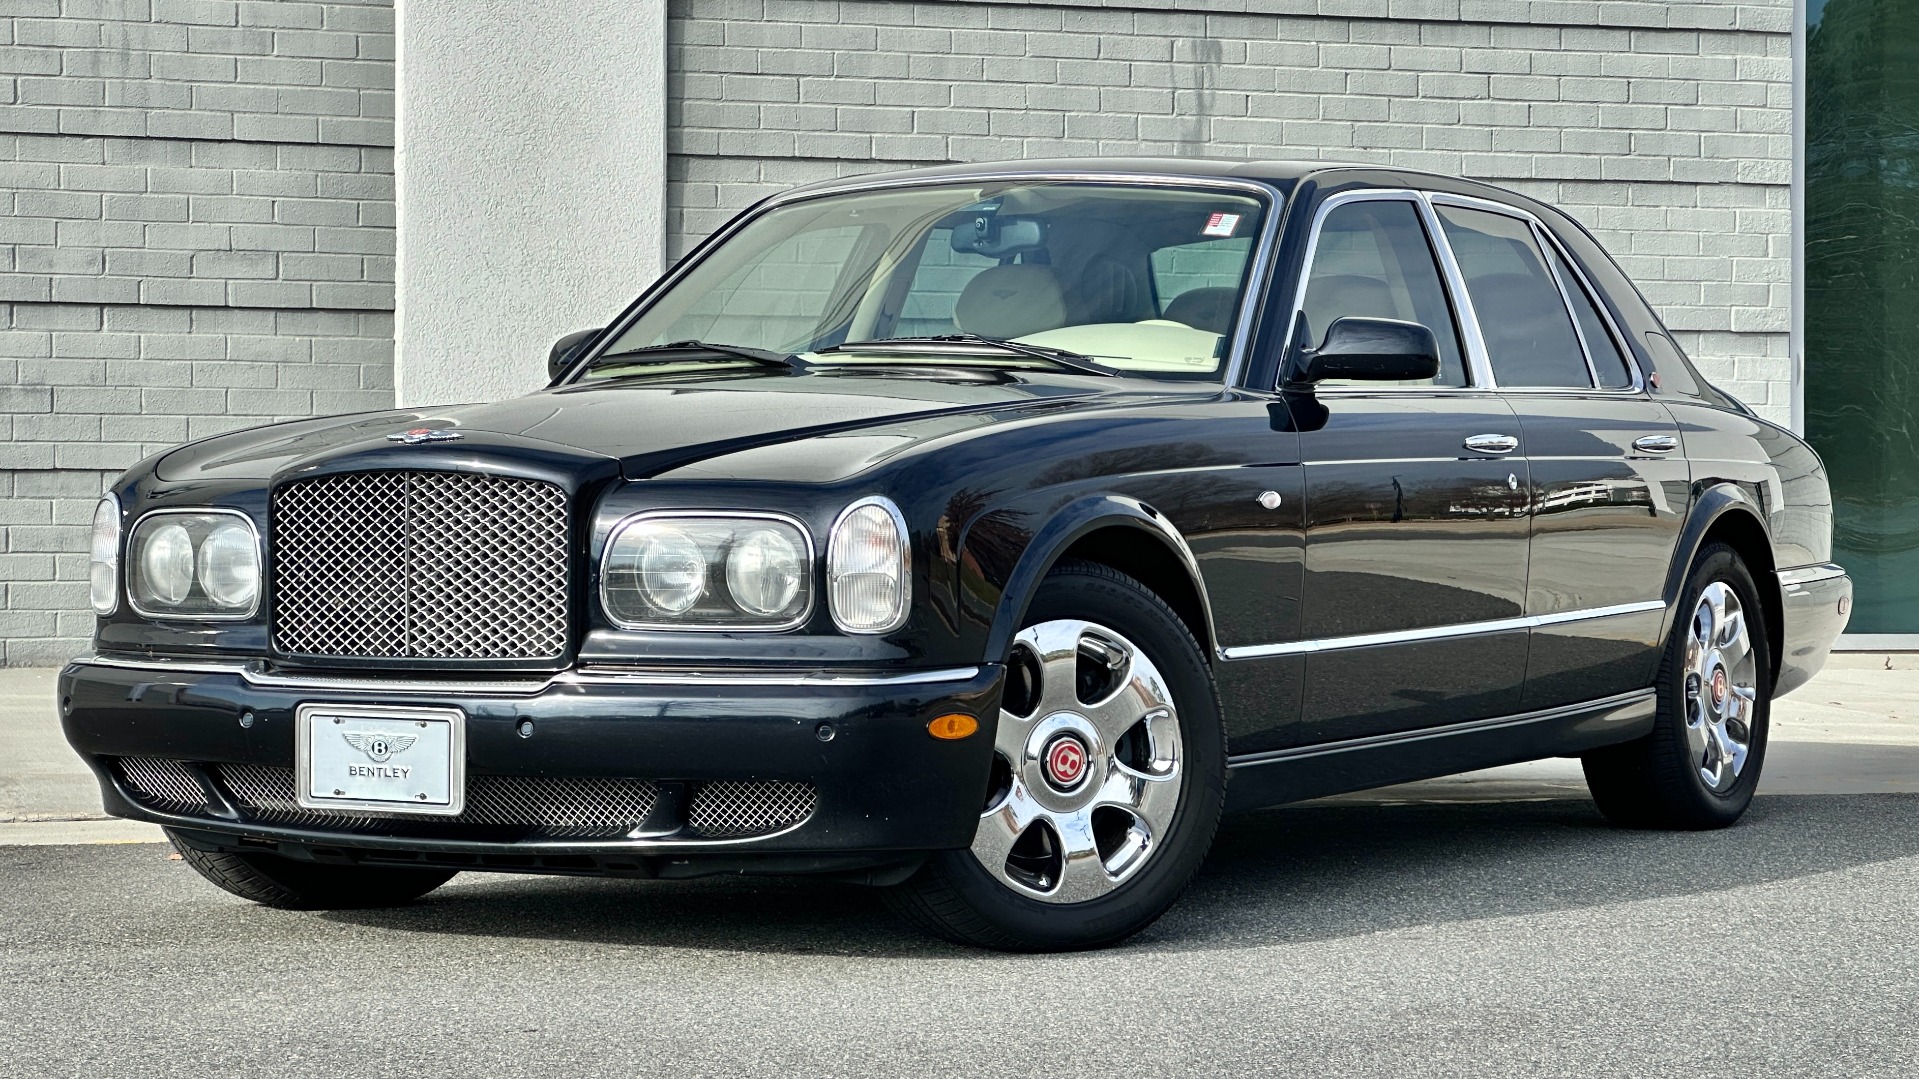 Used 2001 Bentley ARNAGE RED LABEL 6.75L V8 / TURBO / FULL LEATHER / WOOD TRIM / HEATED SEATS / SUNR for sale Sold at Formula Imports in Charlotte NC 28227 1